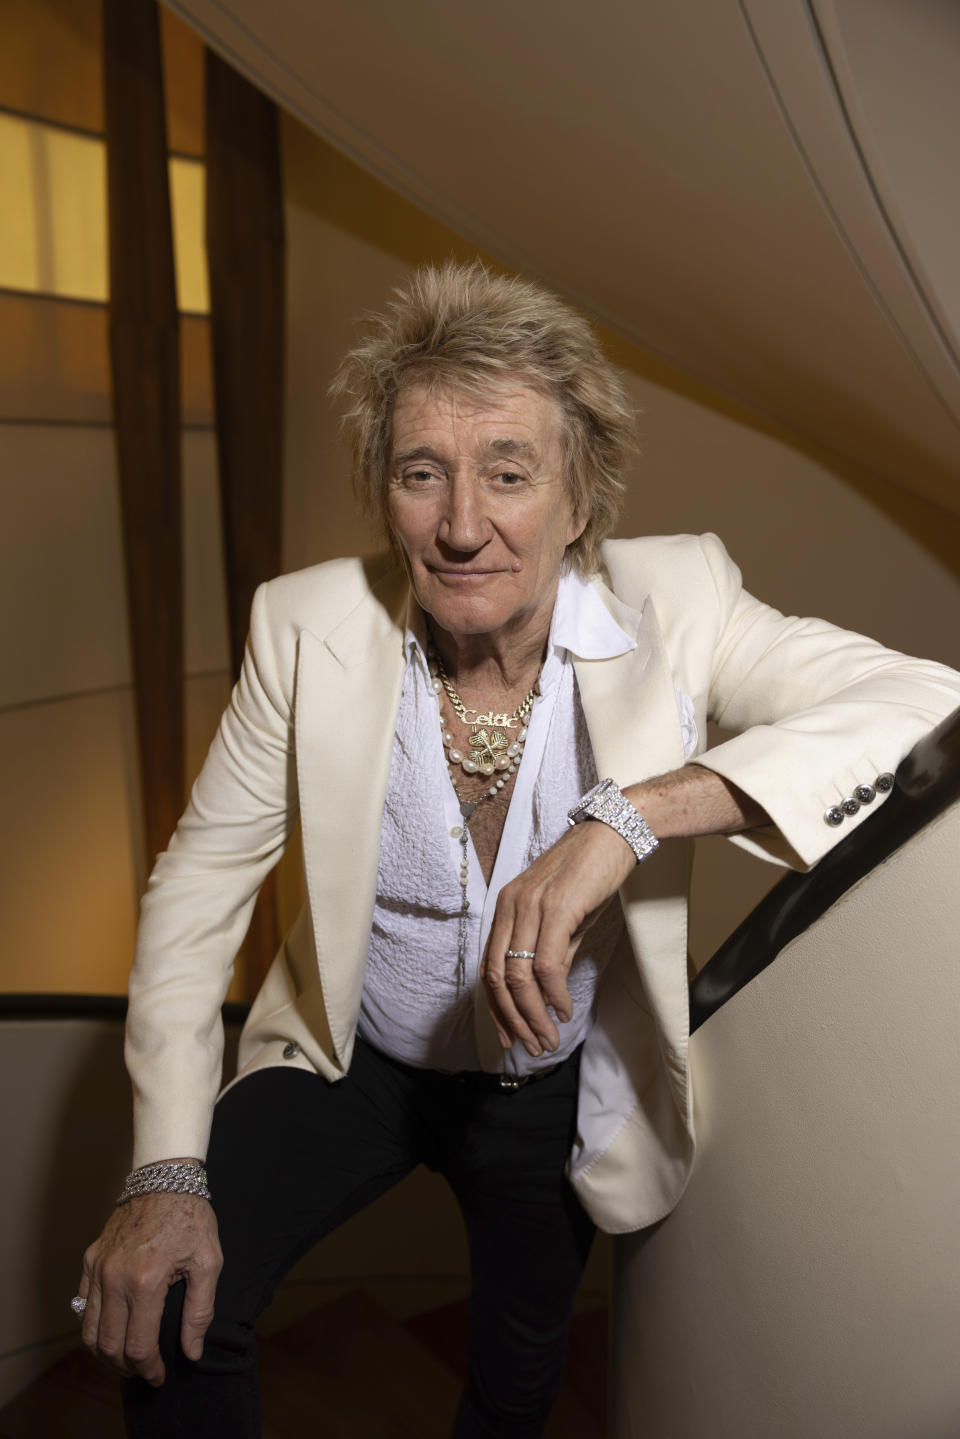 Rod Stewart poses for a portrait on Tuesday, Feb. 7, 2024, in New York. (Photo by Matt Licari/Invision/AP)